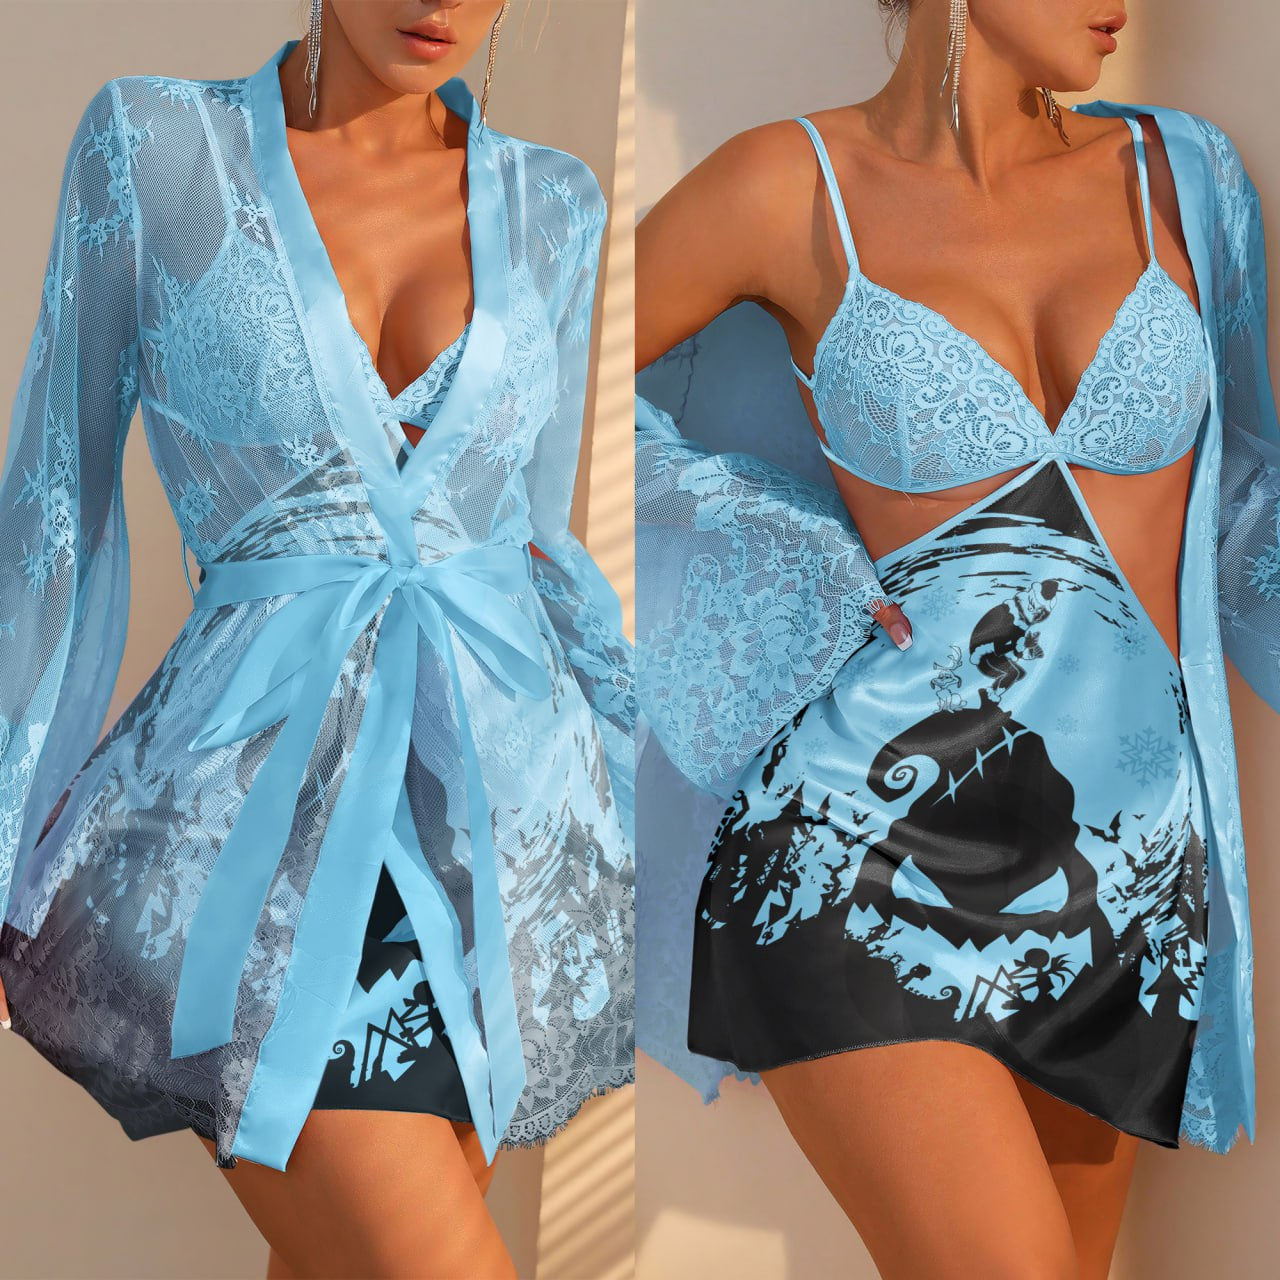 Unique art-themed, contrast lace detailed satin slips with robe from the Saphire collection, designed for comfort and allure.